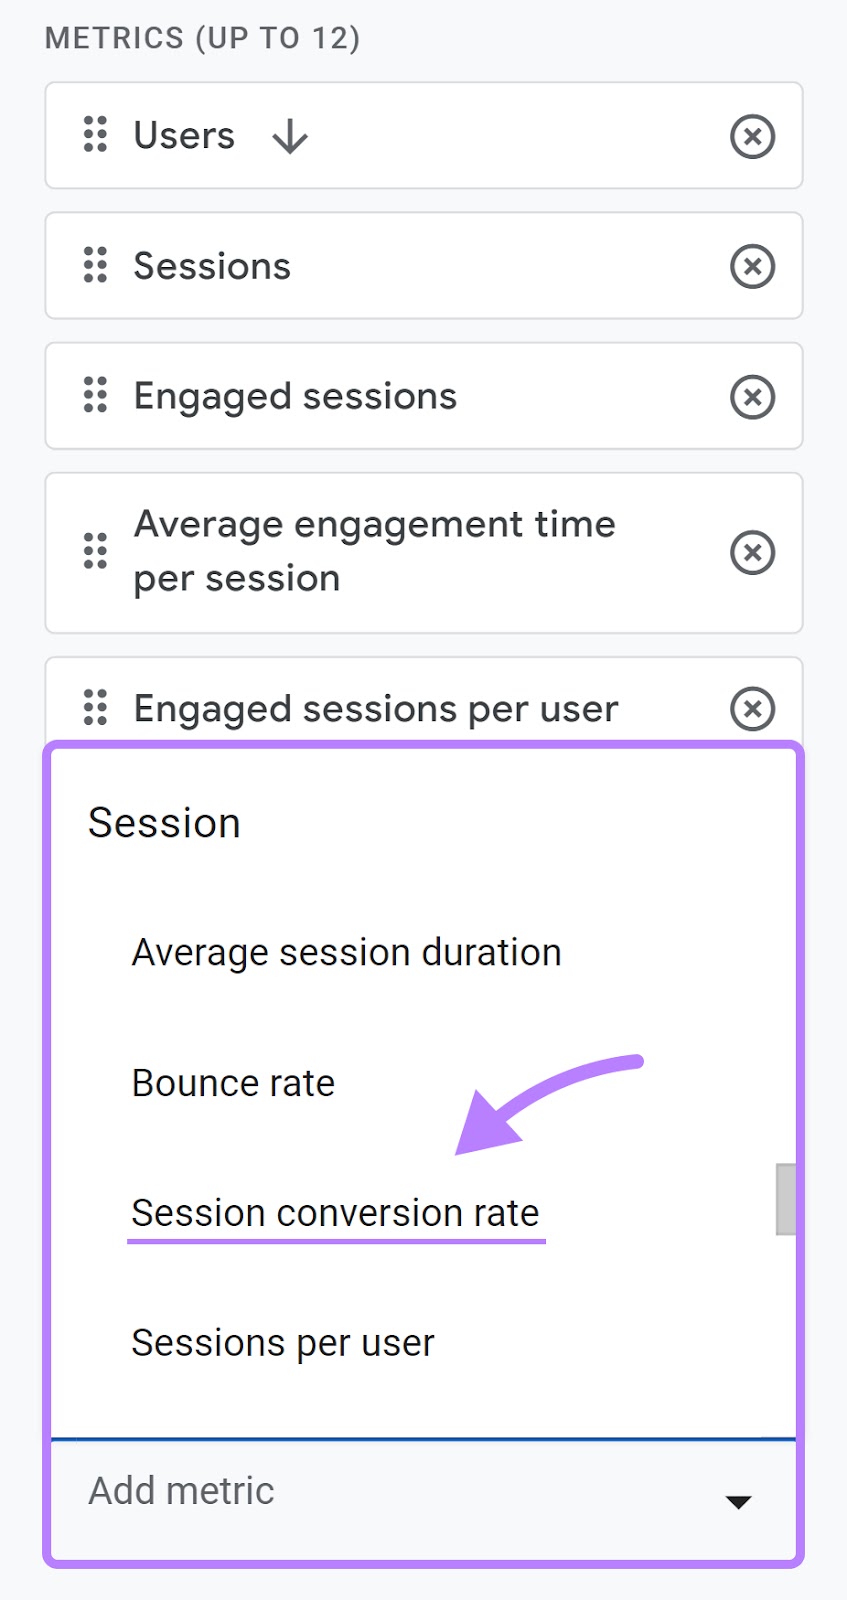 "Session conversion rate" selected under "Add metric" drop-down